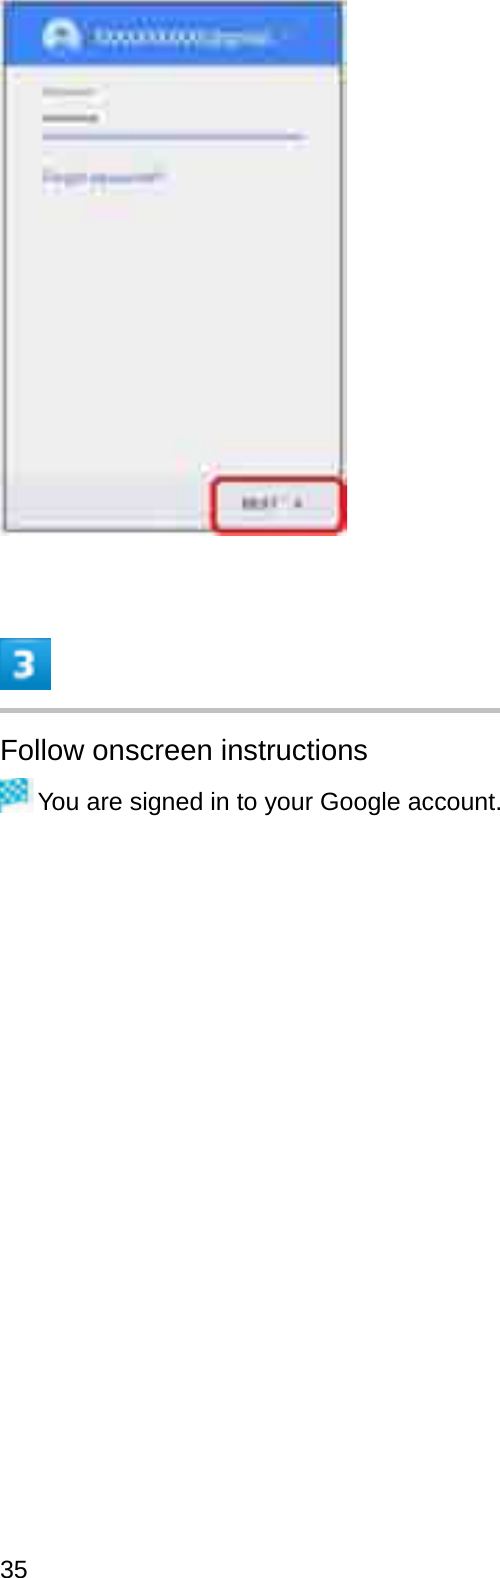 Follow onscreen instructionsYou are signed in to your Google account.35